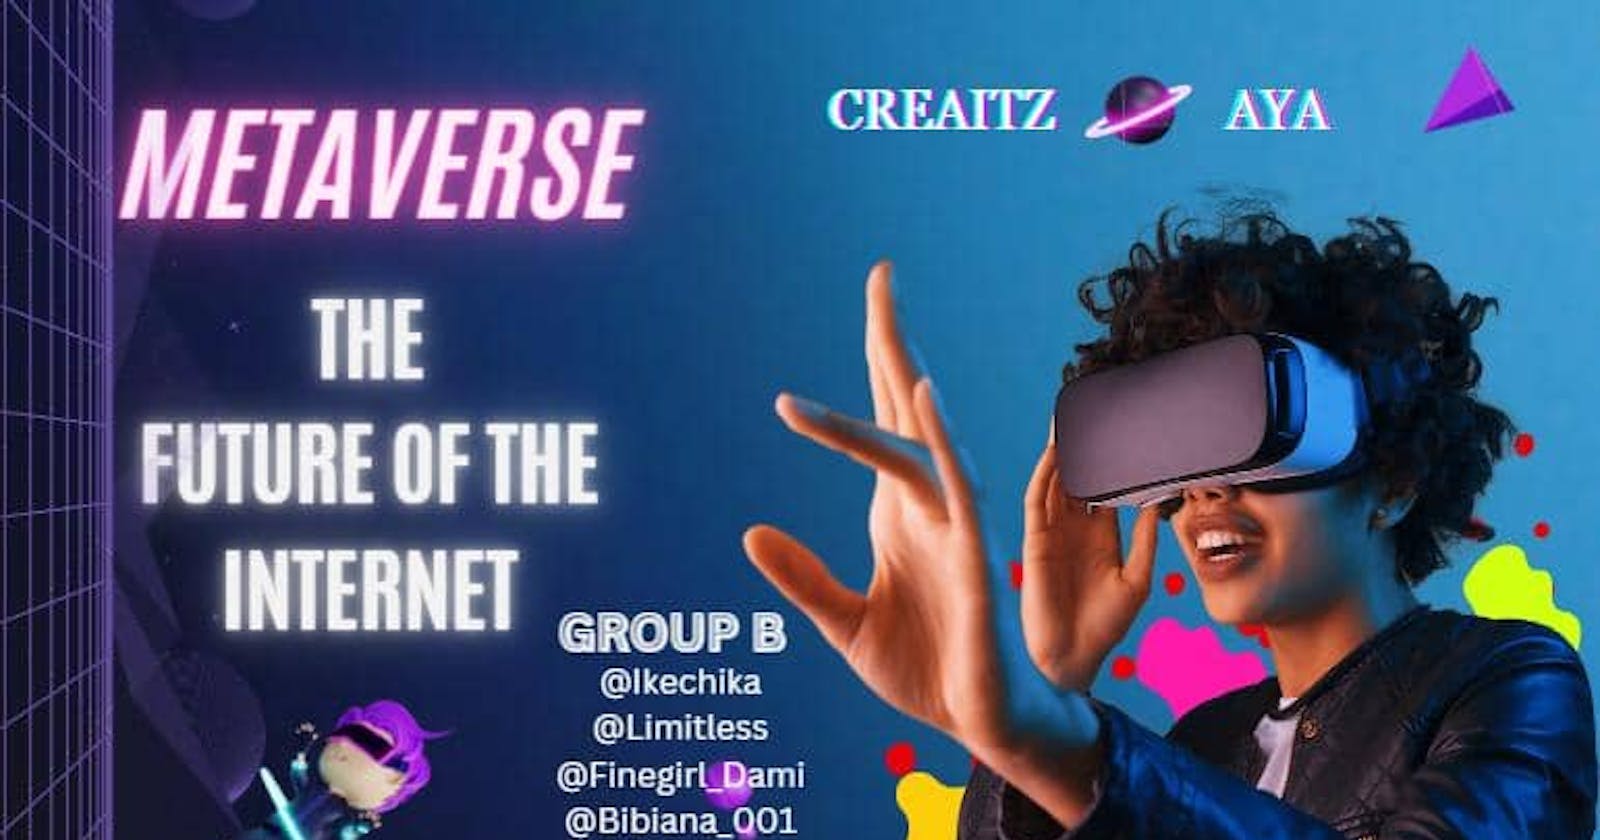 Metaverse: The Future Of The Internet